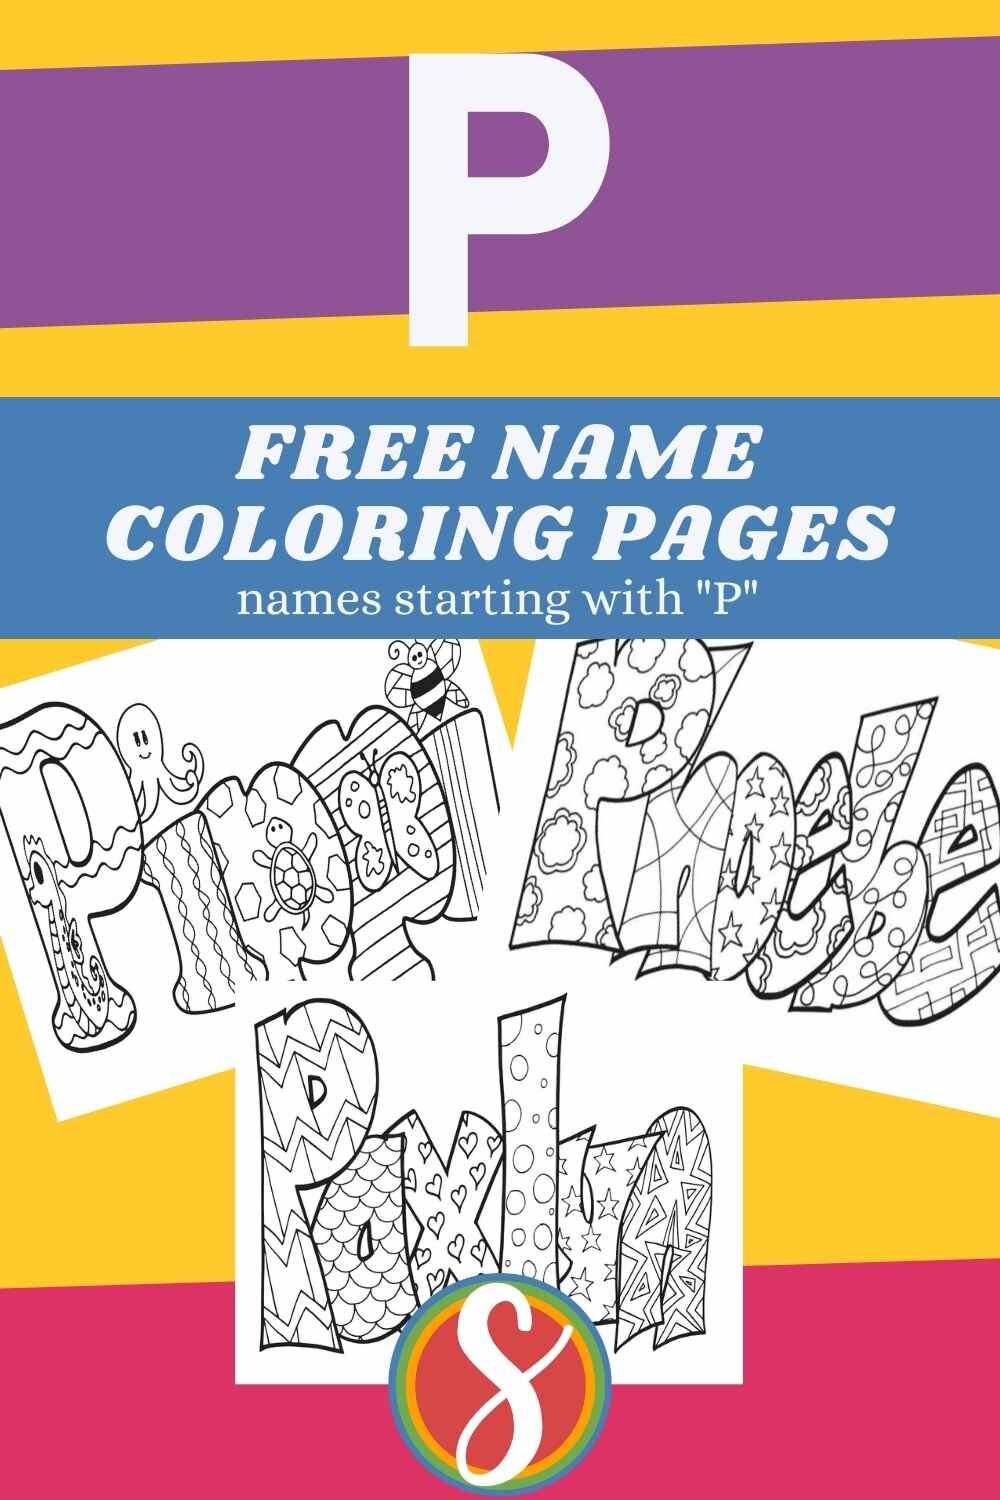 free printable name coloring pages letter p.jpg